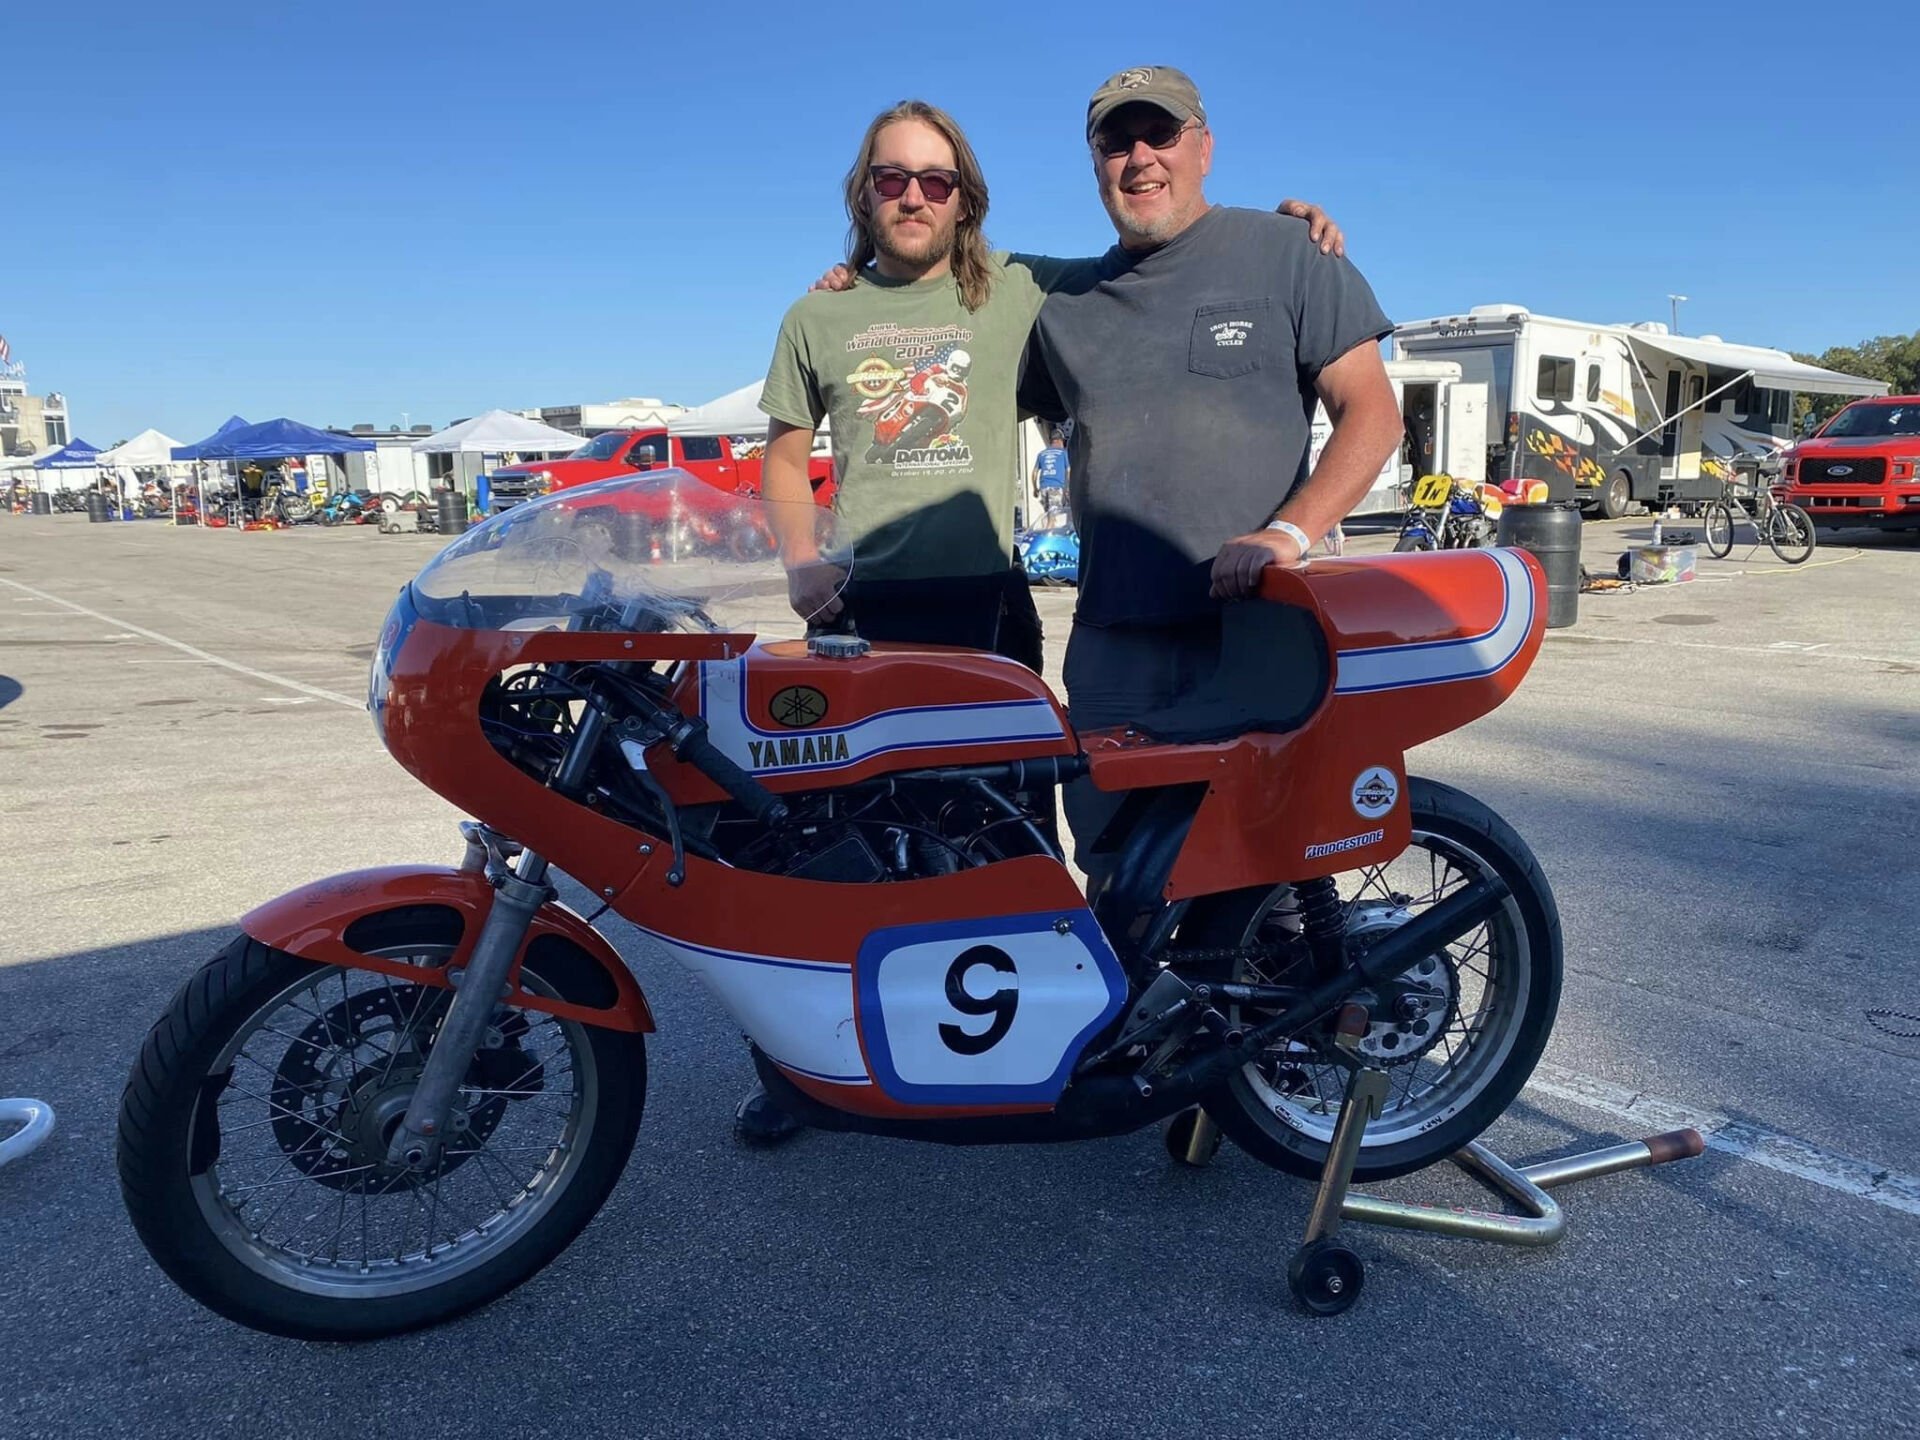 Carl Anderson (right) with Colton Roberts (left) at the Barber Vintage Festival in 2022. Photo by Jacinda Roberts, courtesy AHRMA.